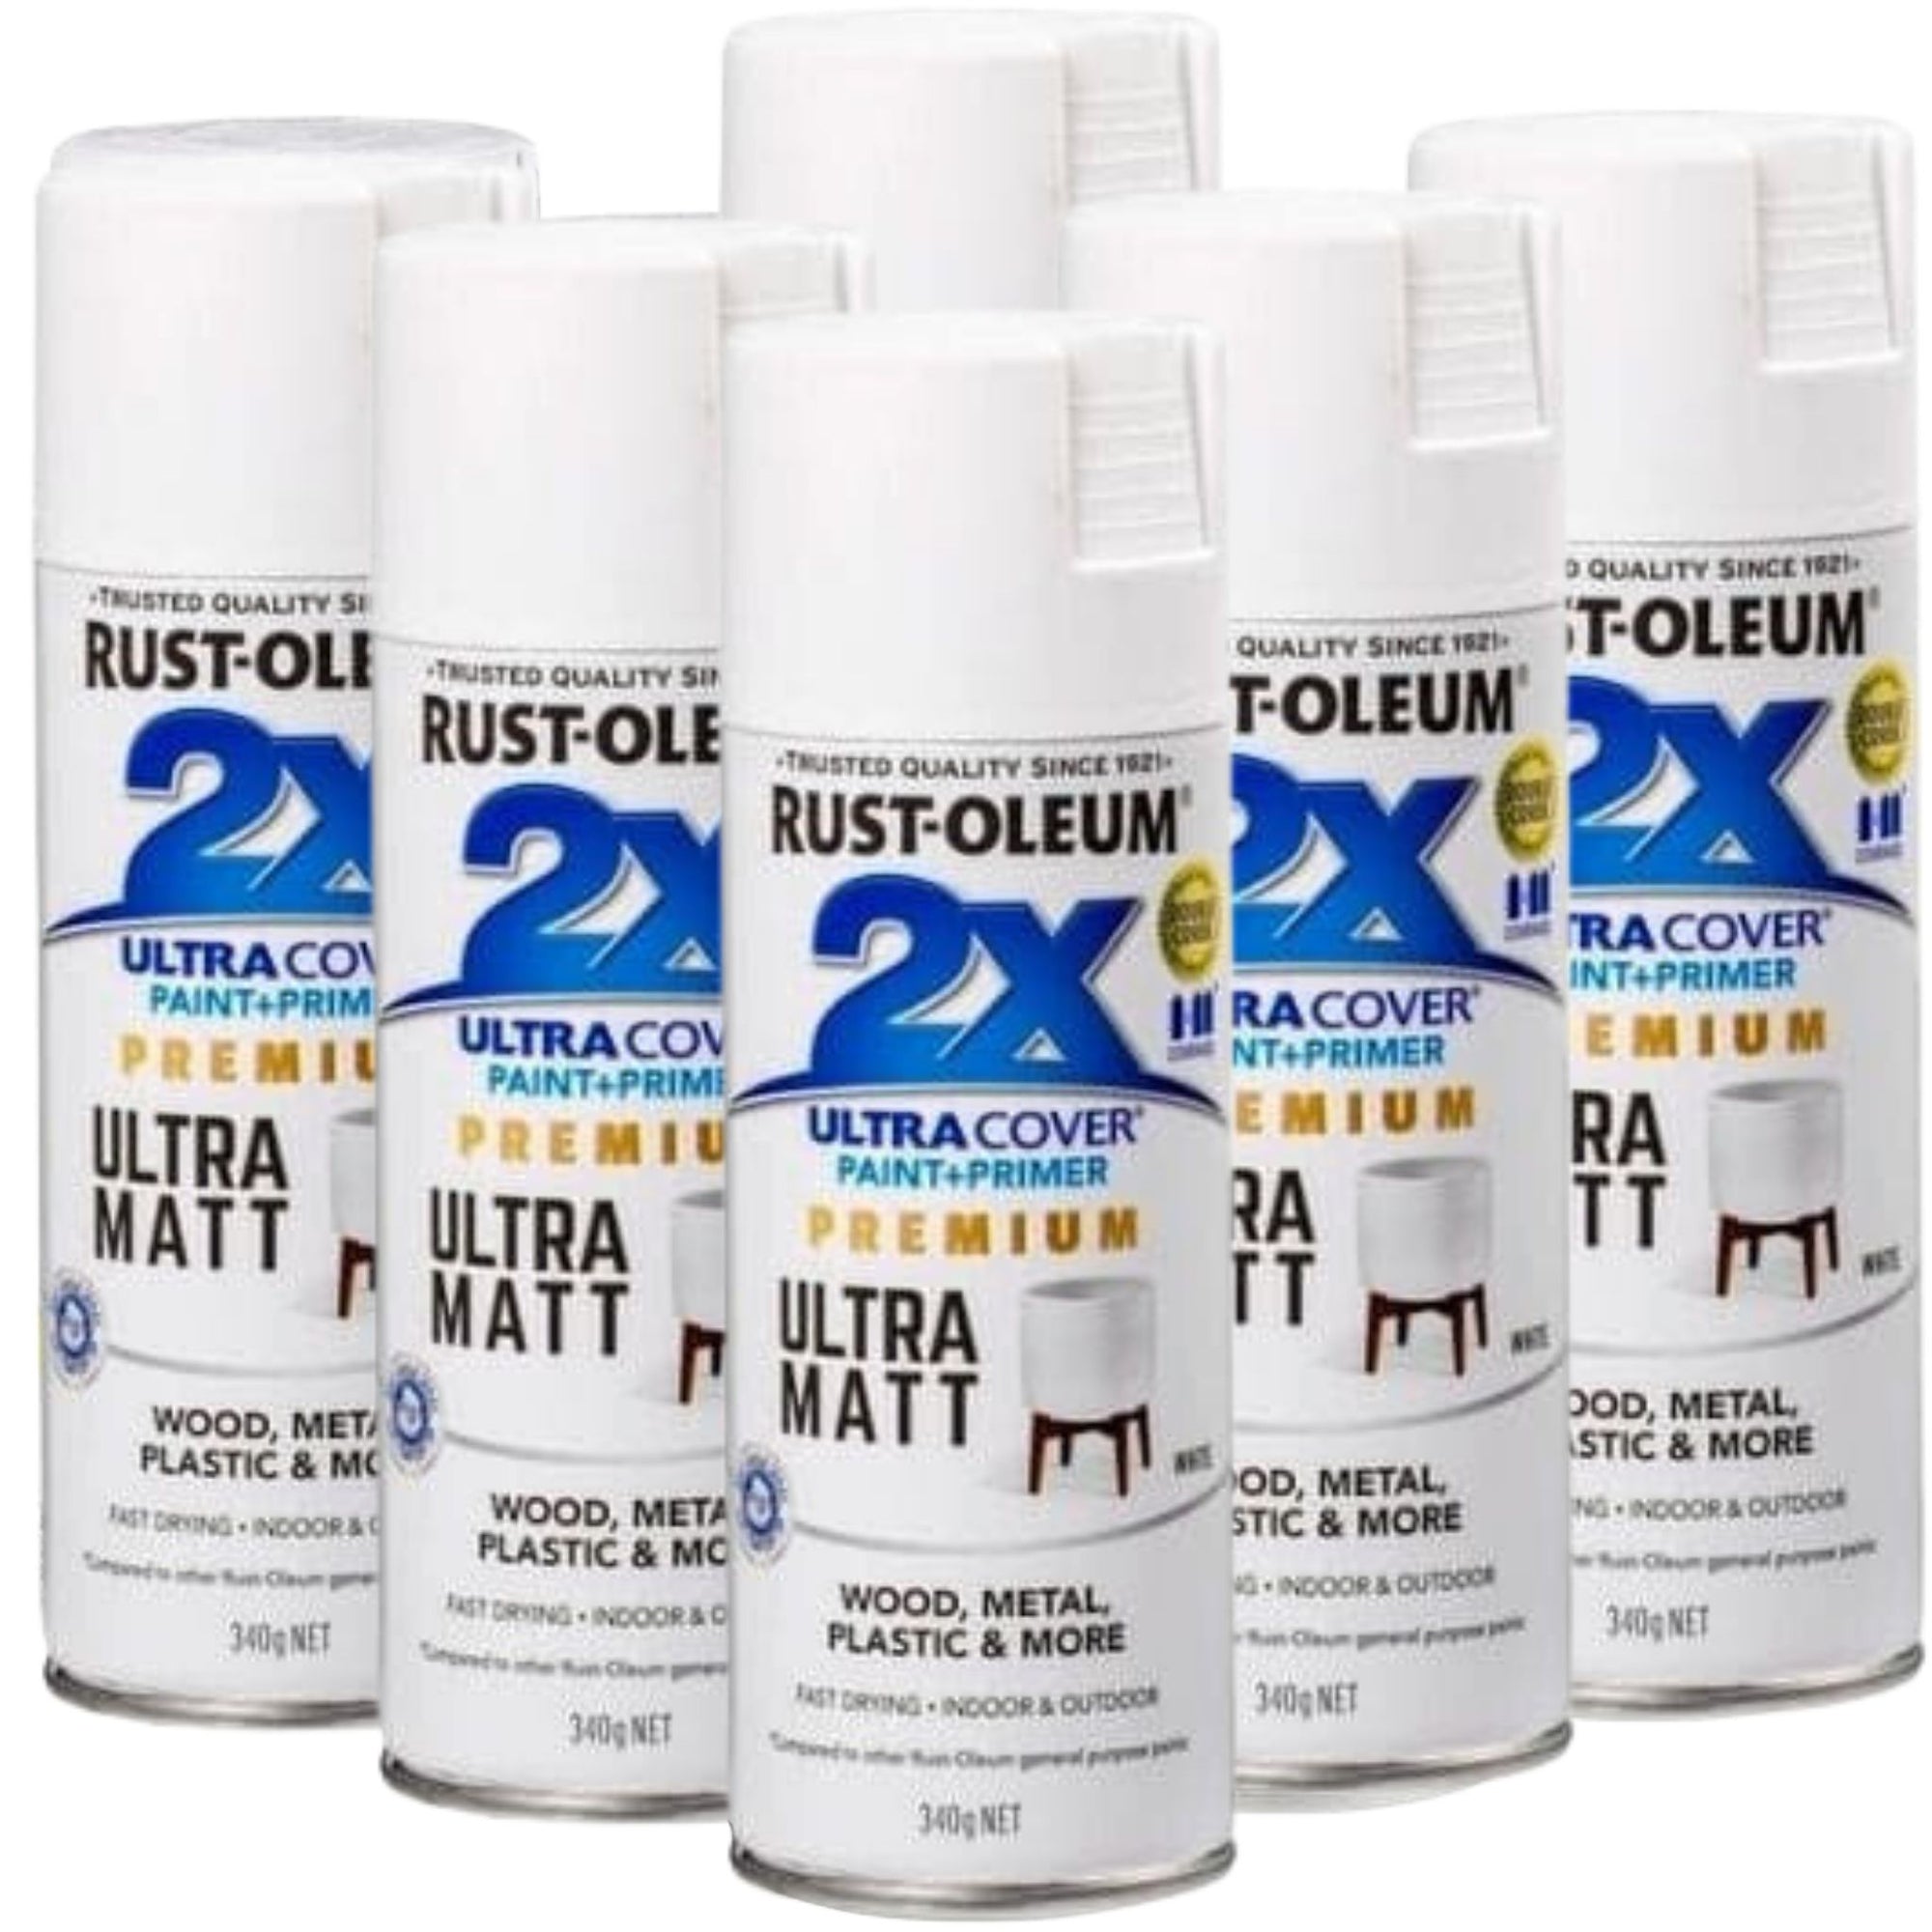 6 Cans | RUST-OLEUM 2X ULTRA COVER PAINT & PRIMER IN ONE | 357855 Matt White - South East Clearance Centre